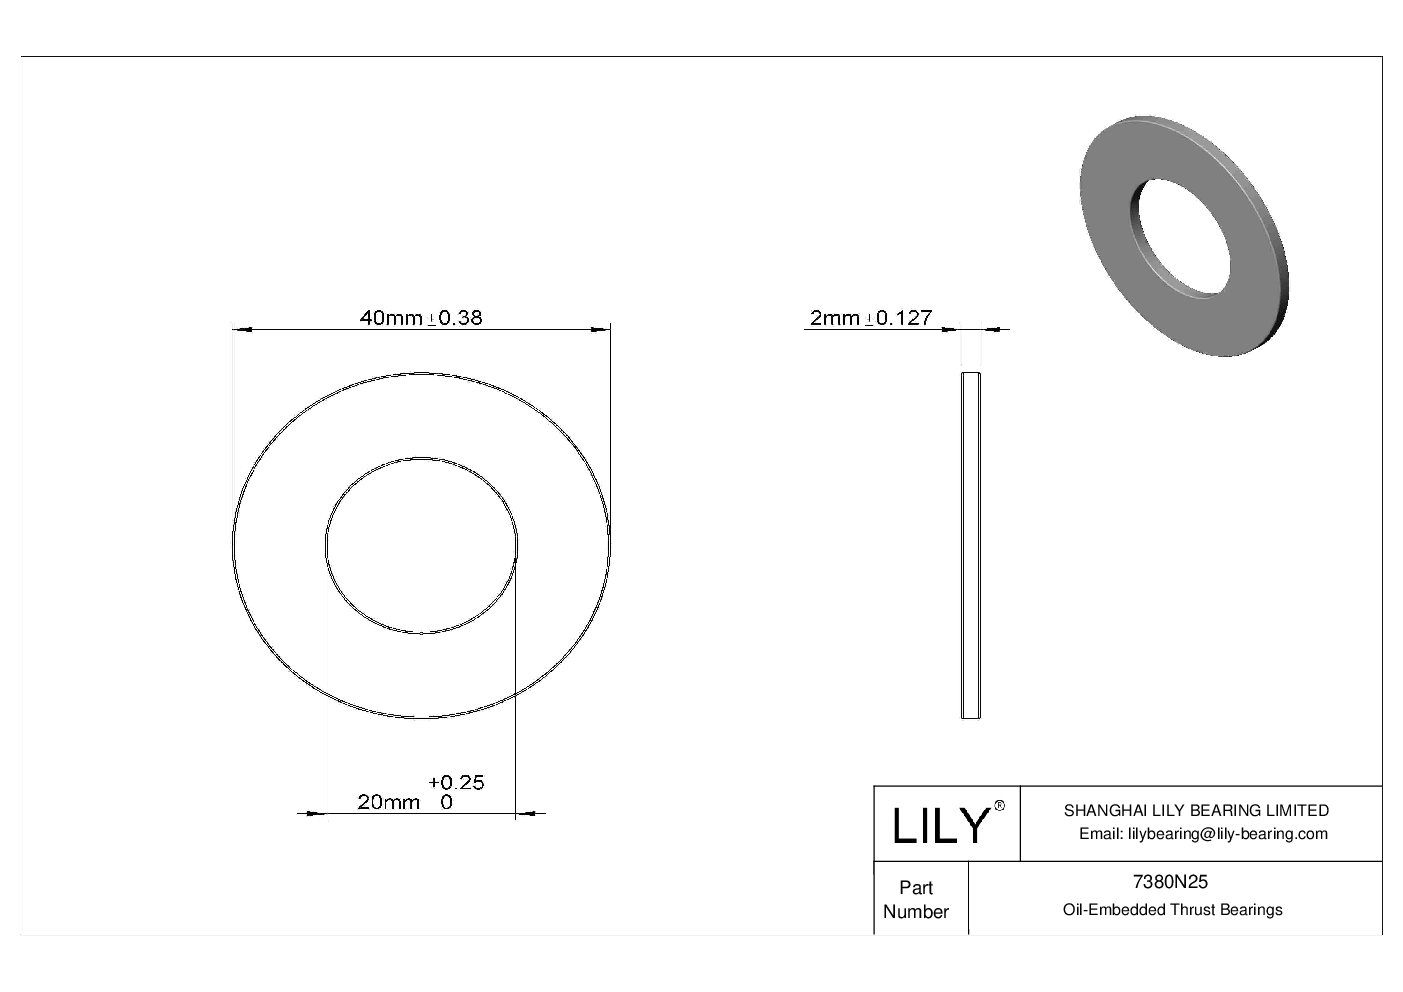 HDIANCF High-Load Ultra-Low-Friction Oil-Embedded Thrust Bearings cad drawing